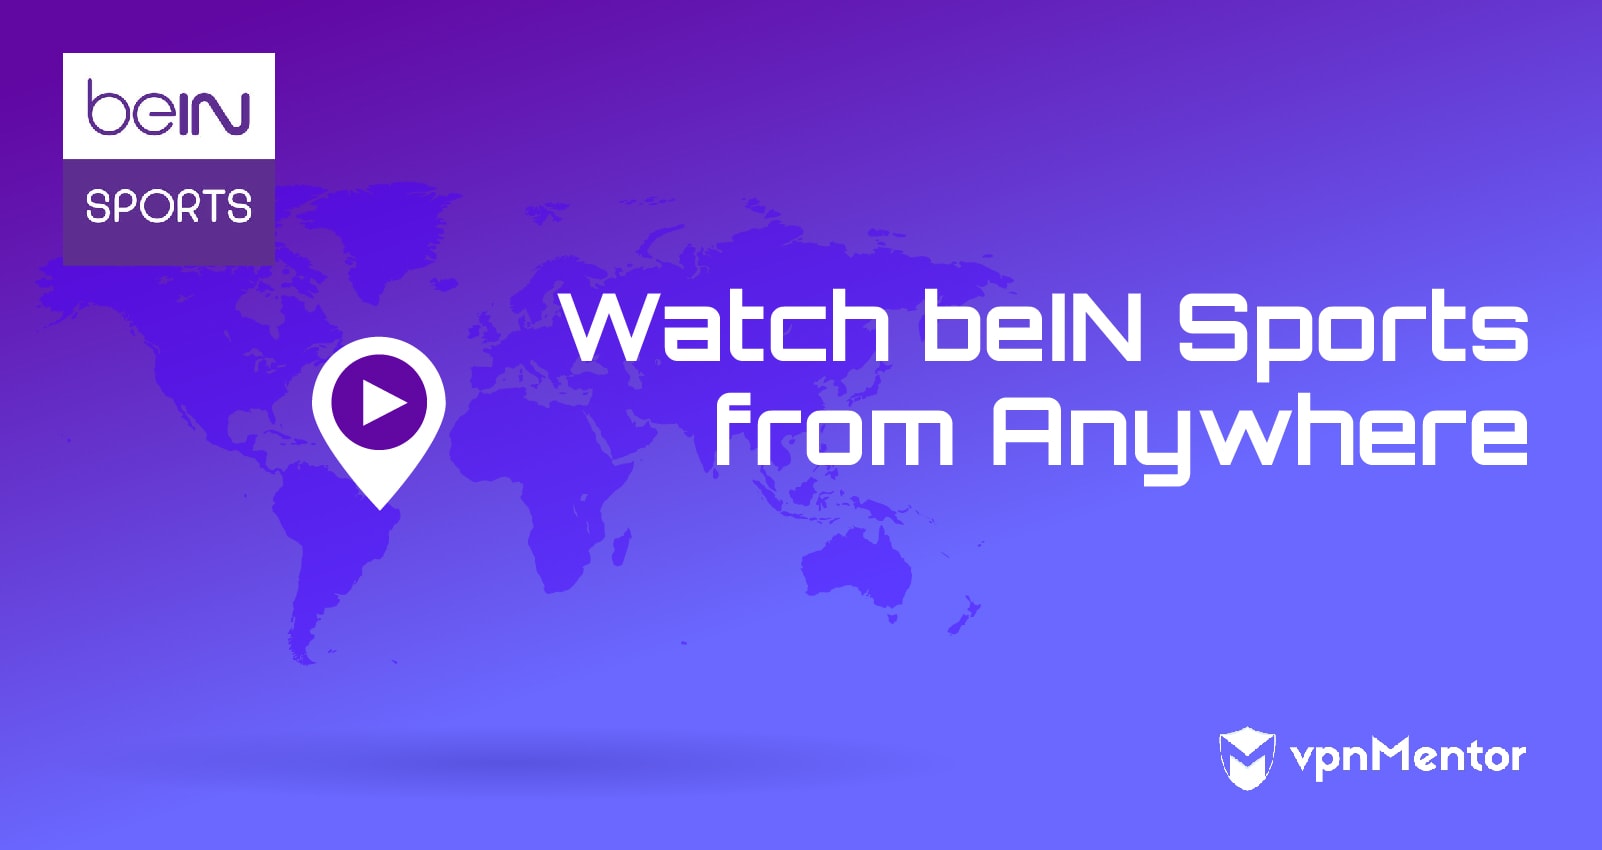 Ambiente Favor moco How To Watch beIN Sports Online Anywhere in 2022 [W/O CABLE]